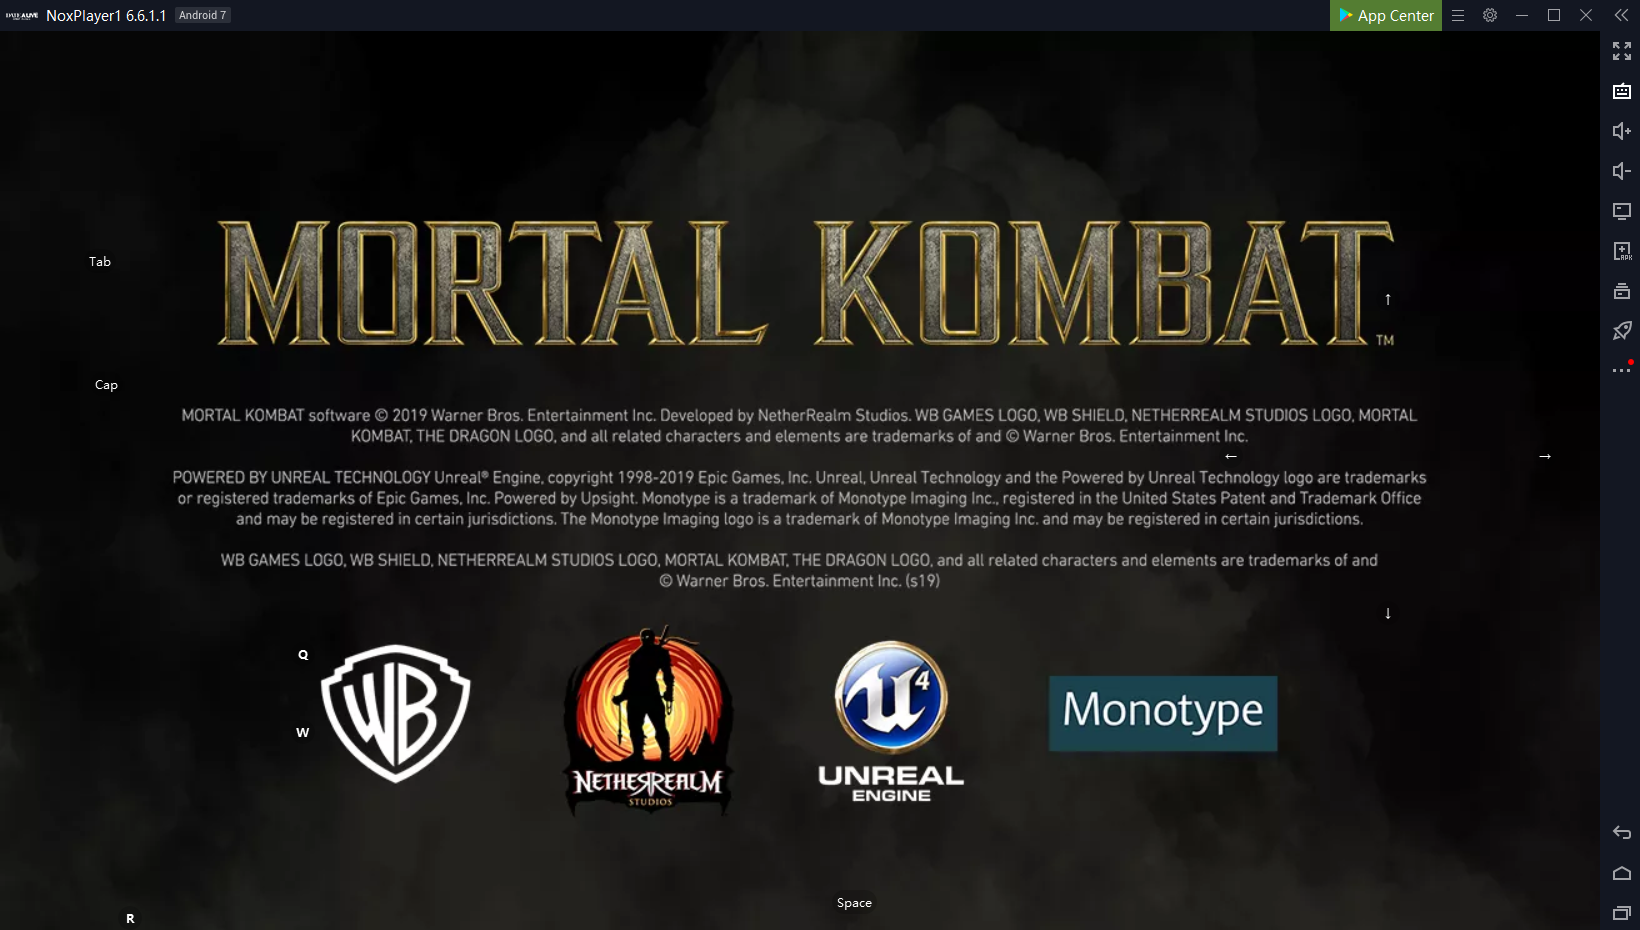 Download and Play MORTAL KOMBAT on PC with NoxPlayer – NoxPlayer